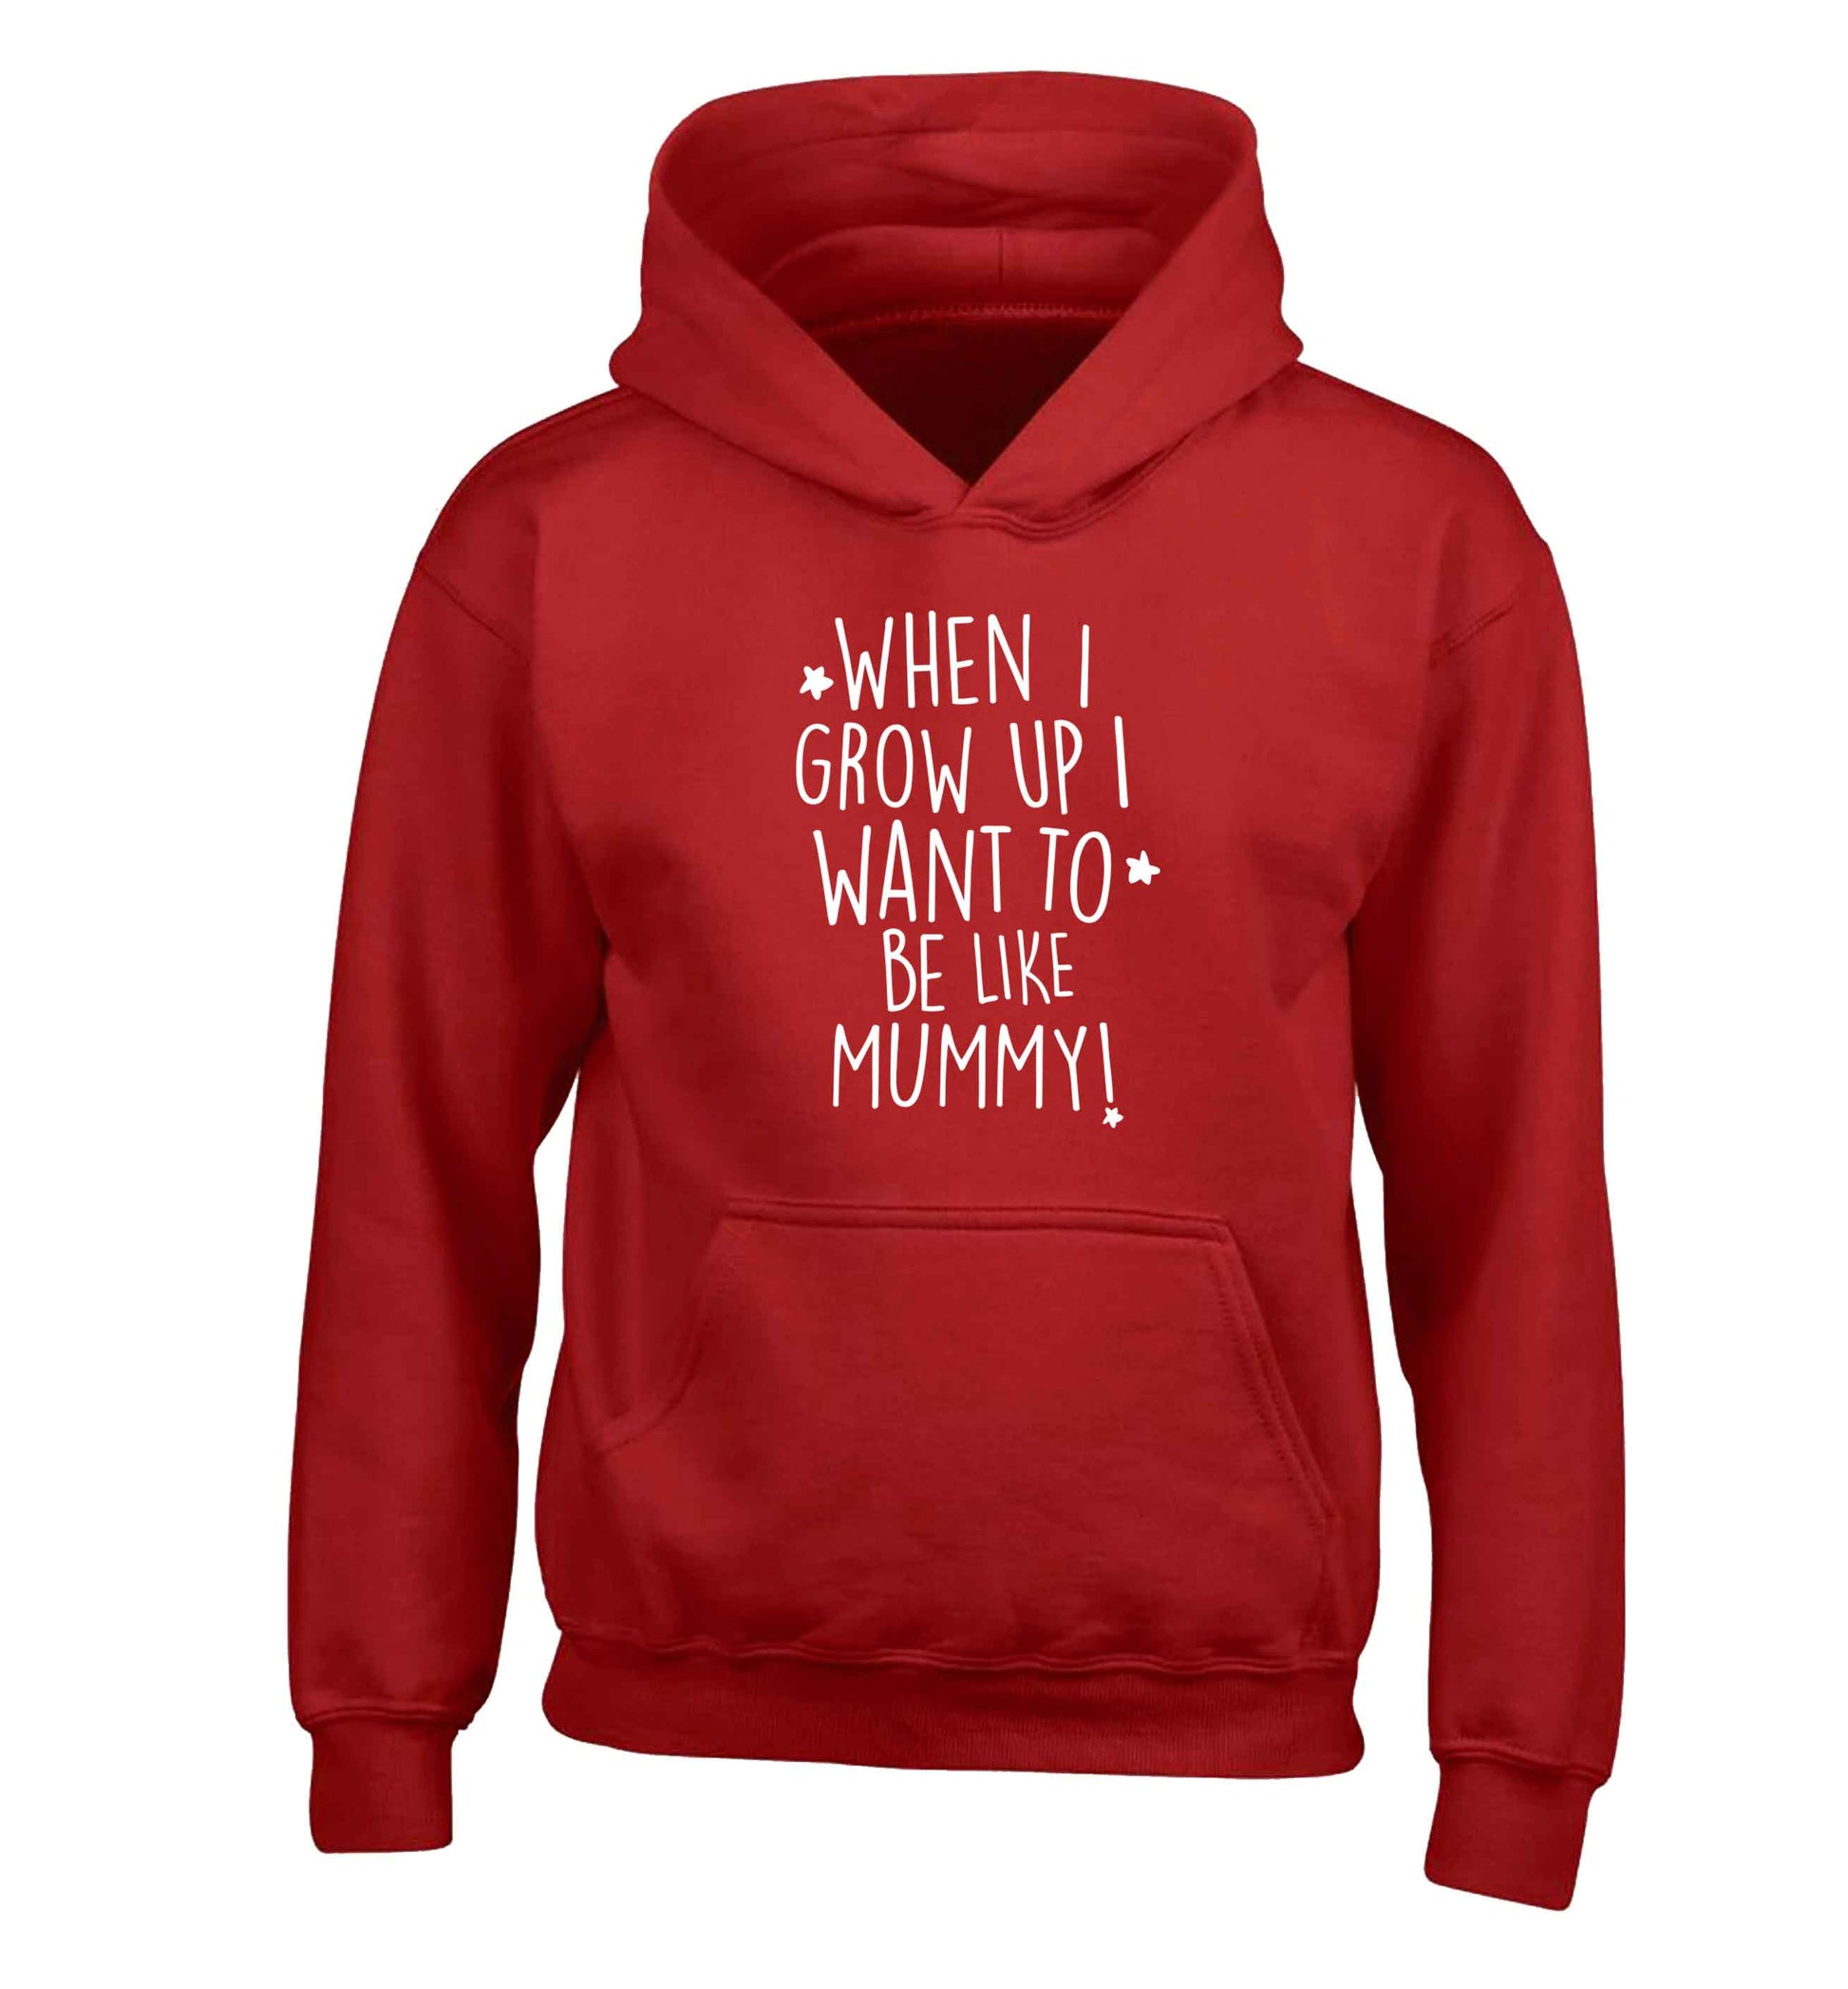 When I grow up I want to be like my mummy children's red hoodie 12-13 Years